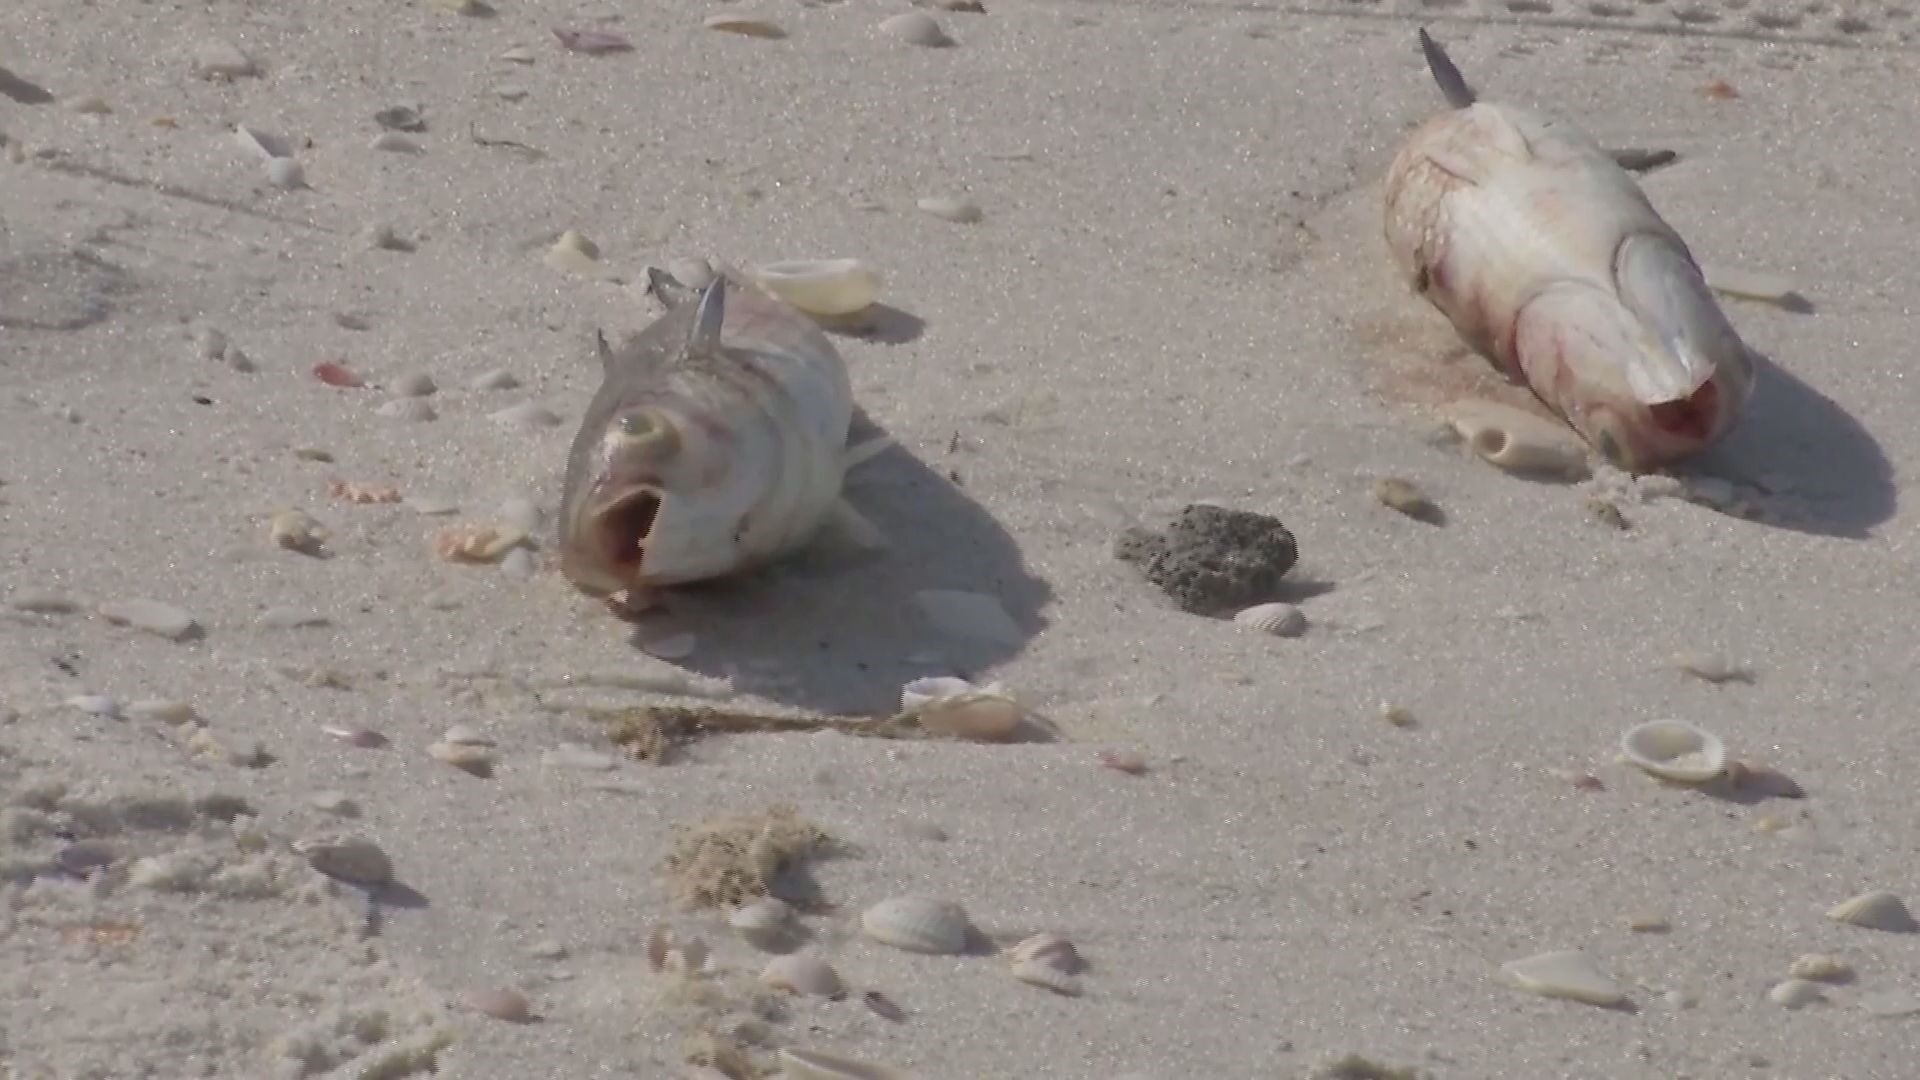 Tests are underway to determine whether red tide is the cause of death for hundreds of fish that washed ashore.